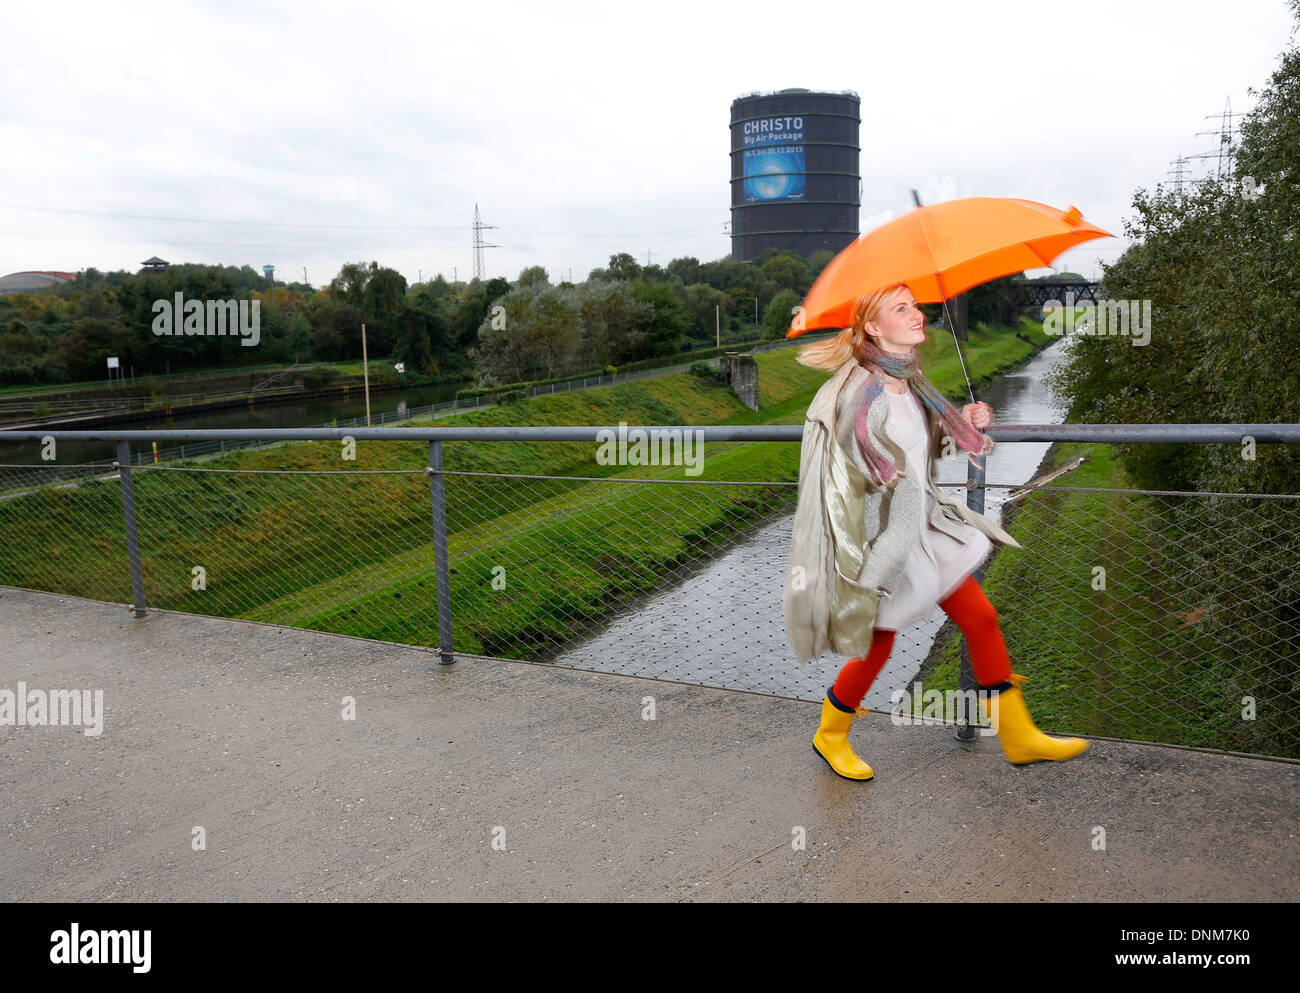 Oberhausen, Germany, a young woman is walking with umbrella in rainy weather Stock Photo